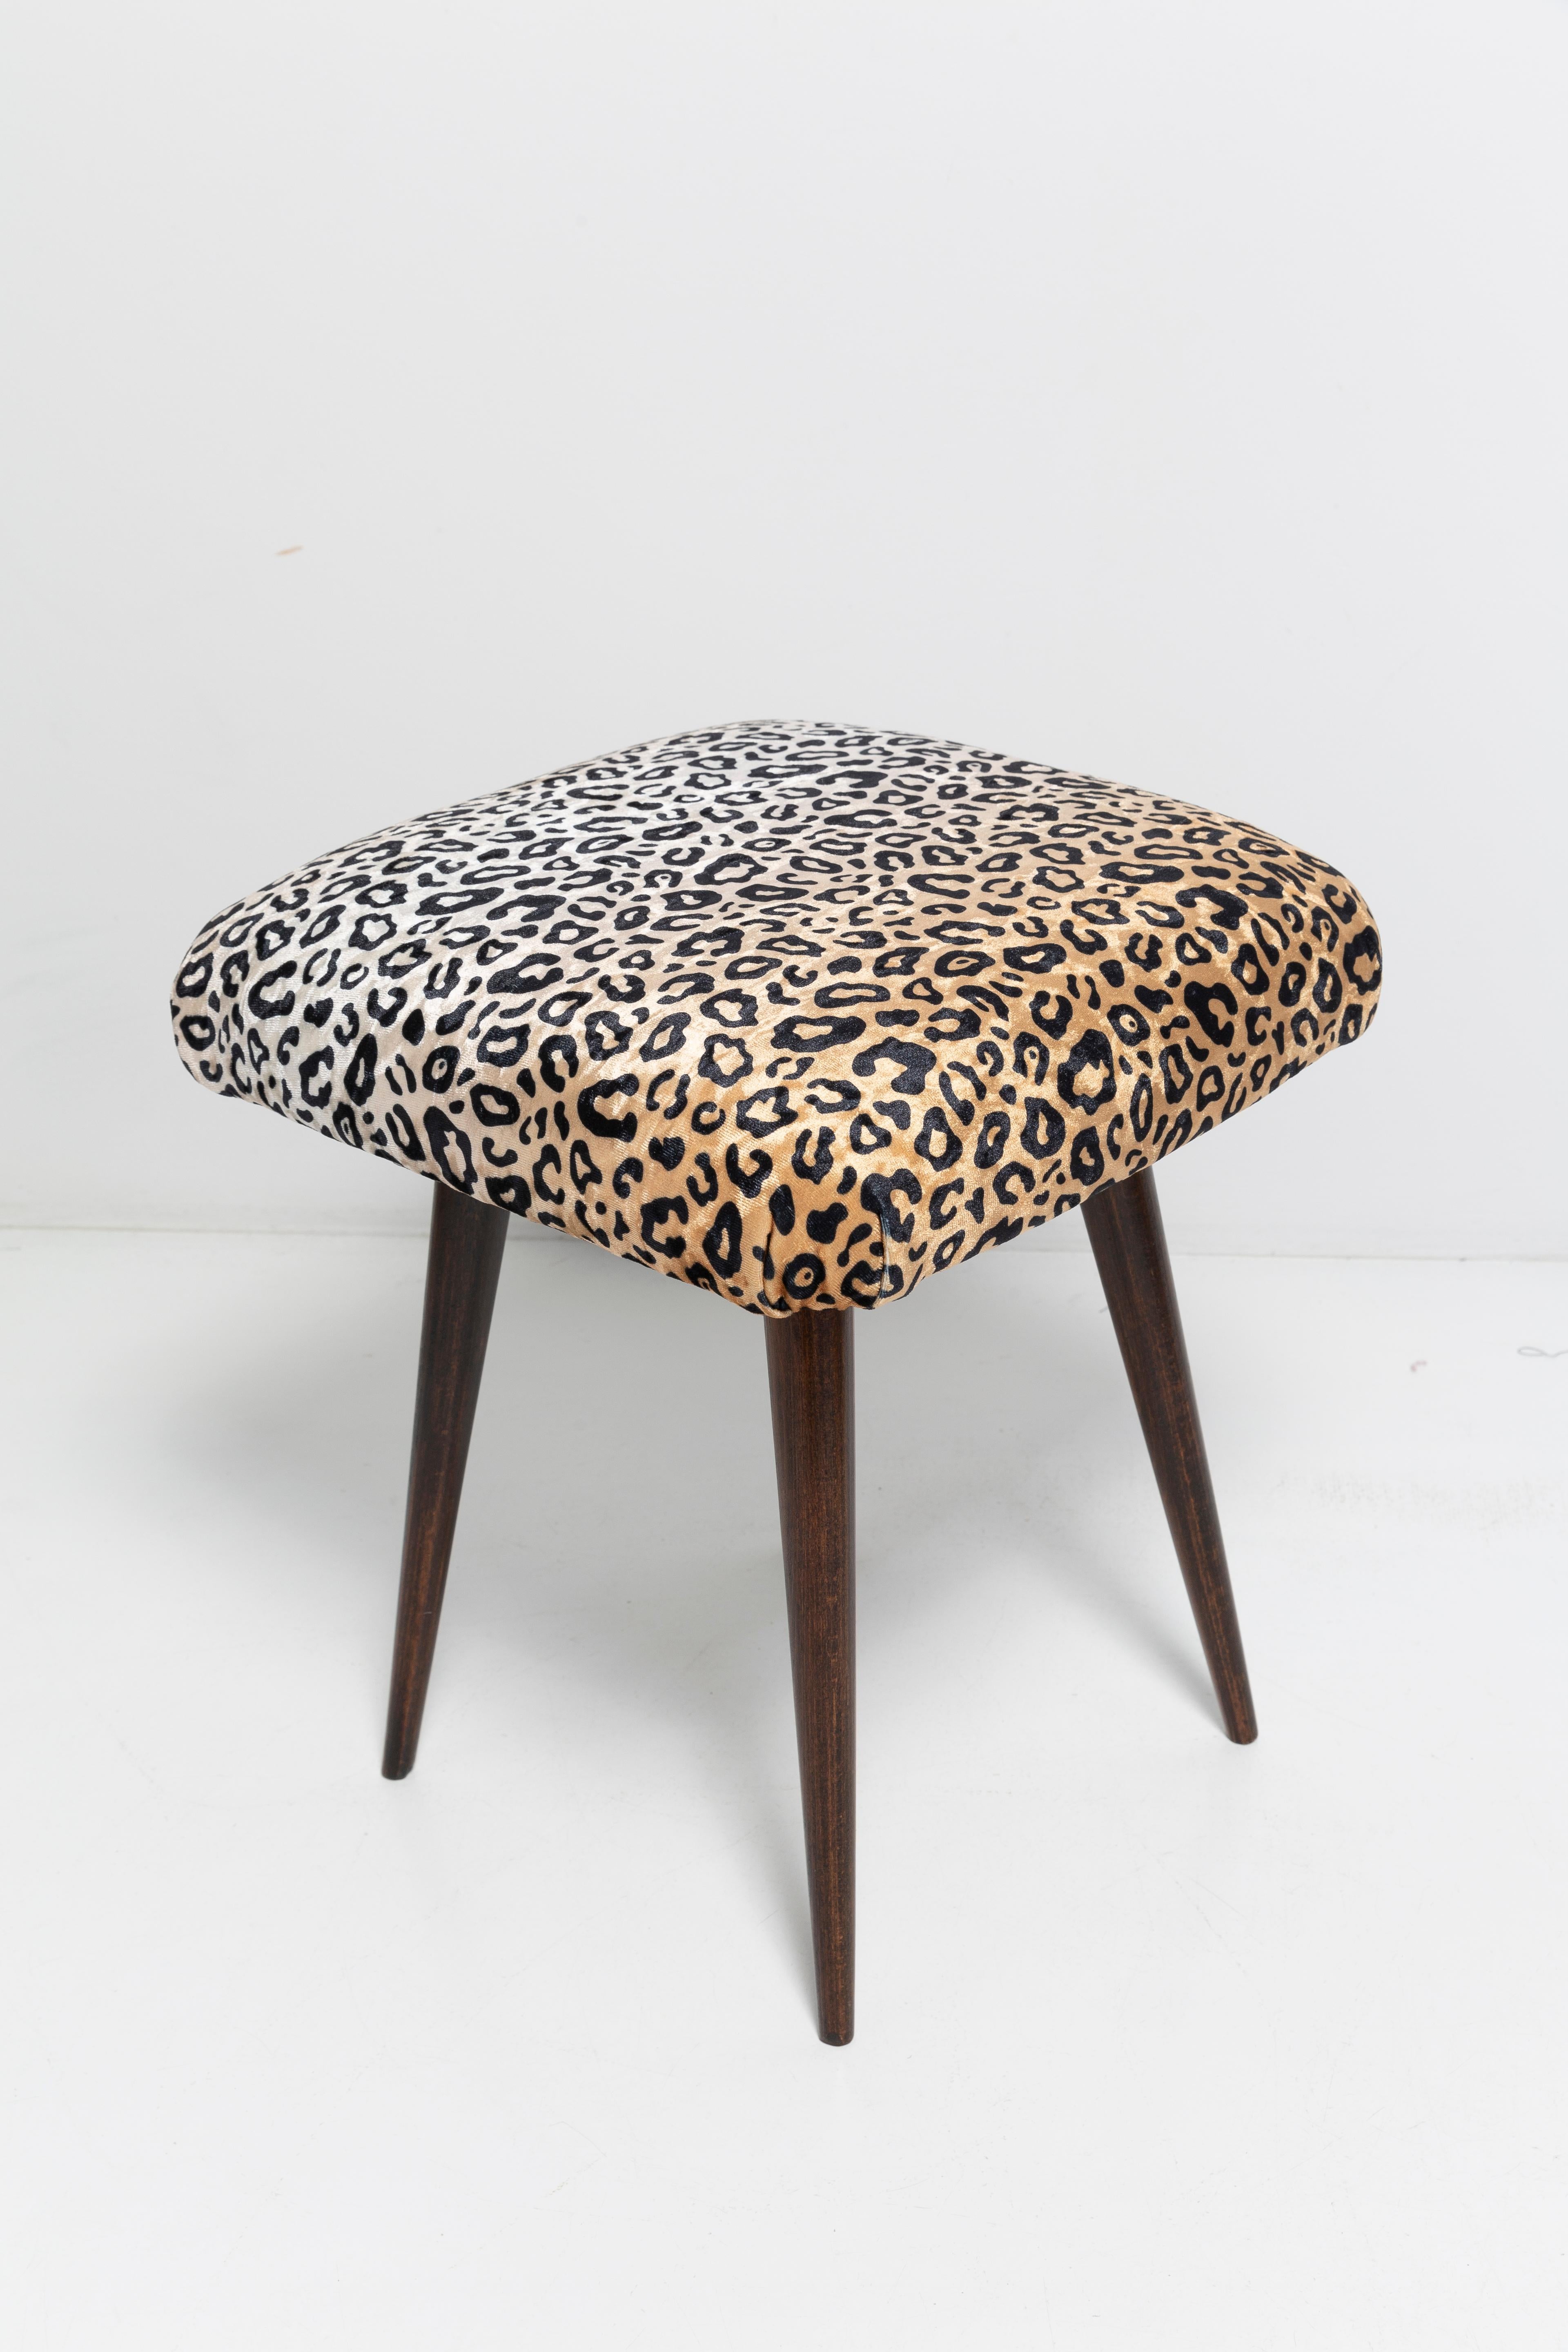 Stool from the turn of the 1960s and 1970s. High-quality printed velvet - soft and very pleasant to the touch, vivid and natural colors - a beautiful, original pattern! The stool consists of an upholstered part, a seat and wooden legs narrowing